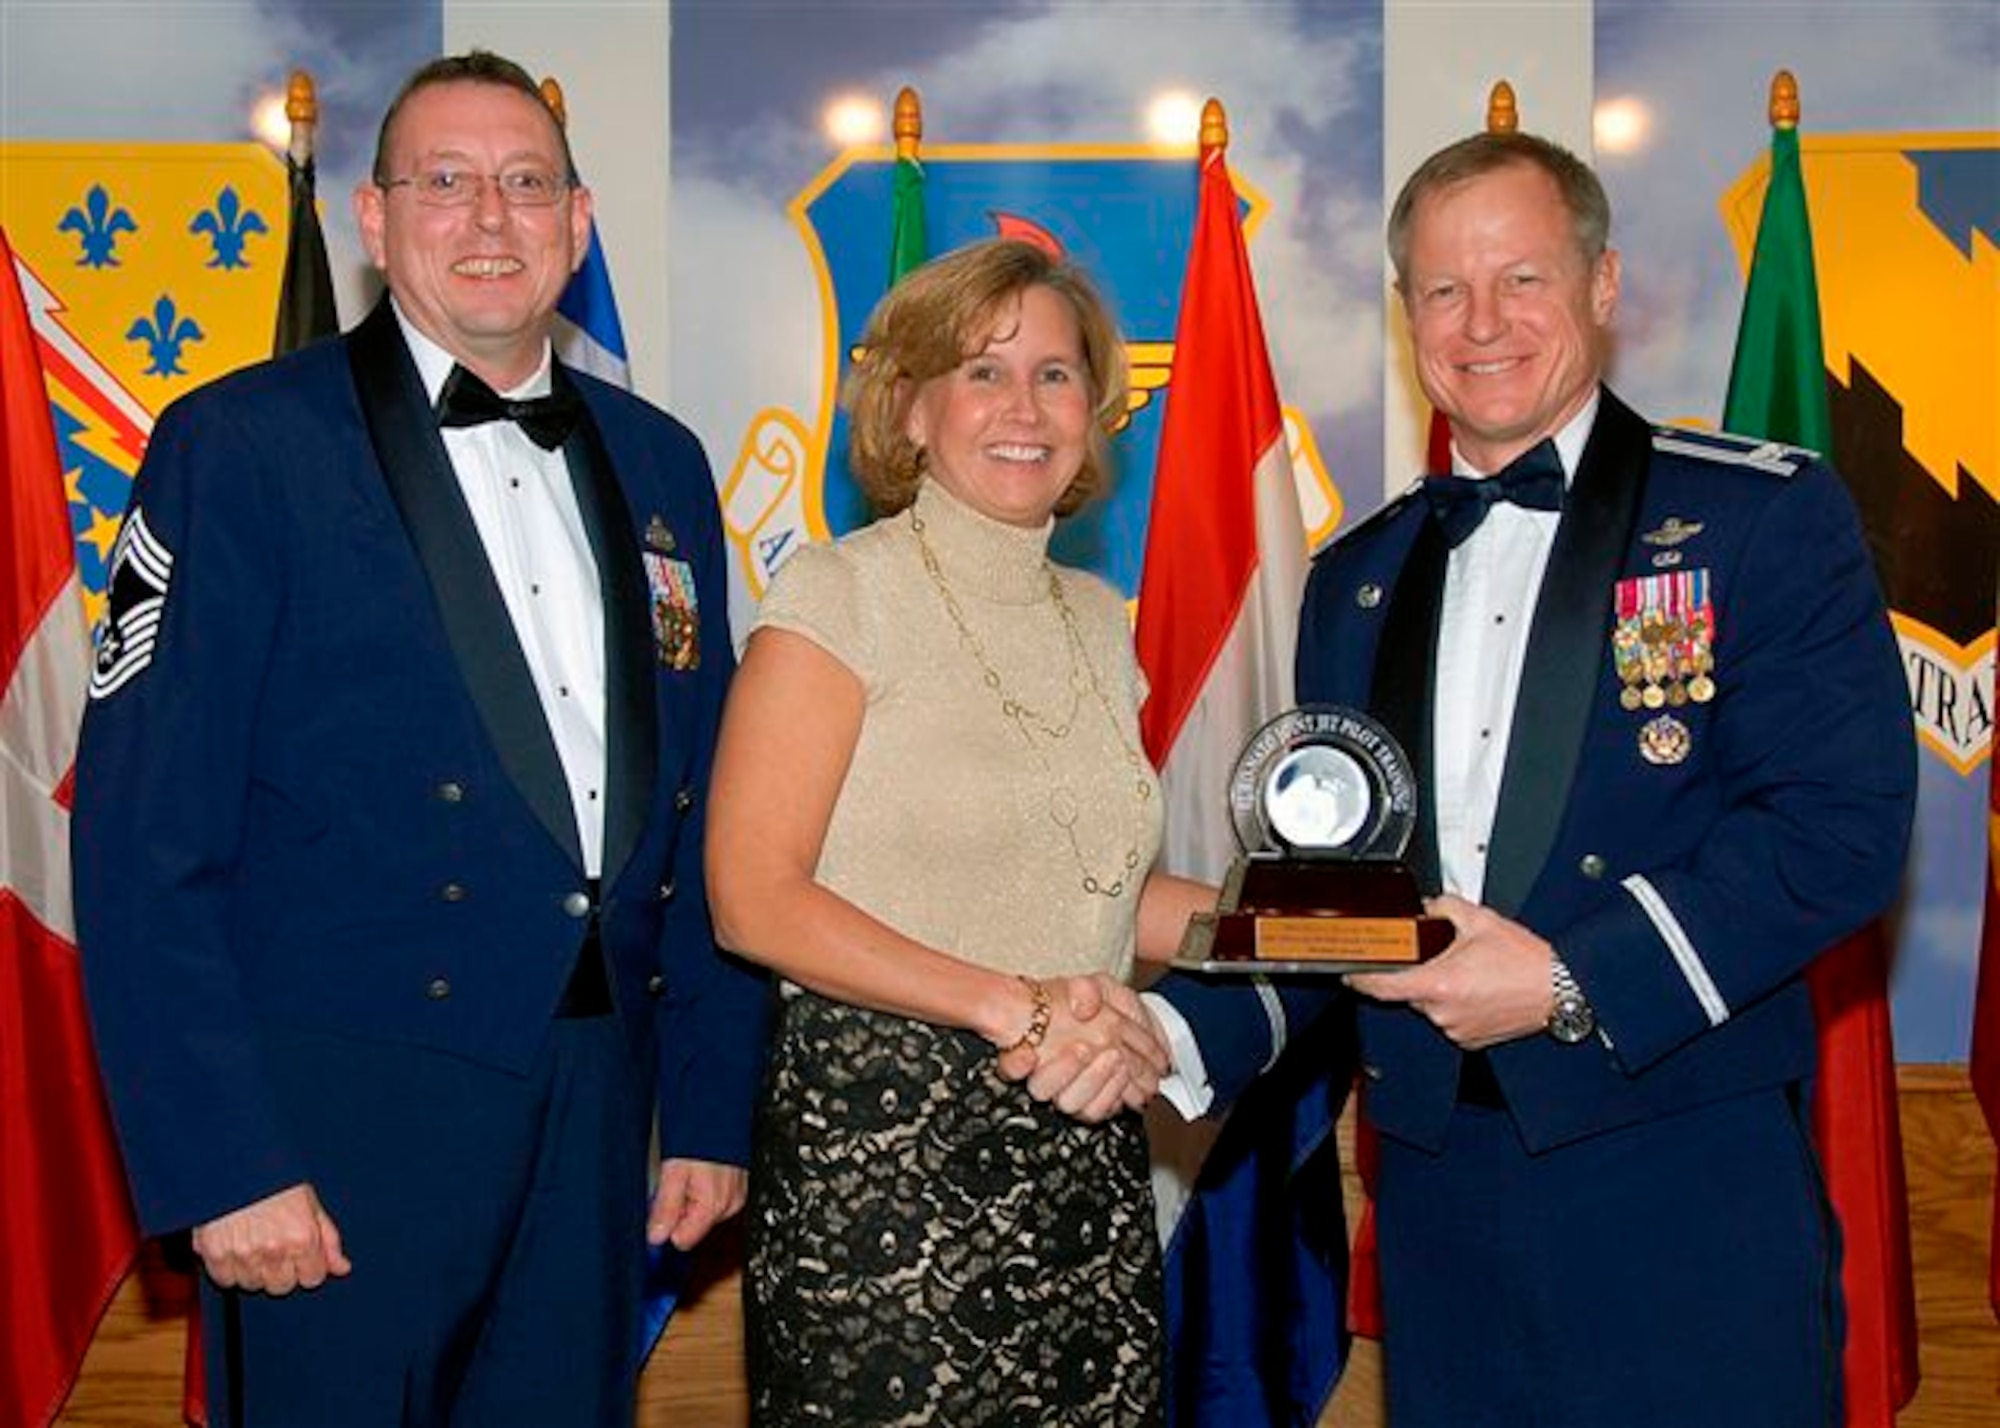 Michele Houck, center, accepts the award as the 80th Flying Training Wing's 2008 Senior Civilian of the Year, catagory II. The 80th FTW commander's secretary ensured that more than 1,200 appointments were met. She also coordinated temporary duty travel arrangements for the commander and the vice commander for 18 TDY trips to locations ranging from San Antonio, TX to Serbia. Also pictured is Col. David Petersen, 80th FTW commander, and Chief Master Sgt. Norman Thierolf, the wing's command chief. (U.S. Air Force photo) 